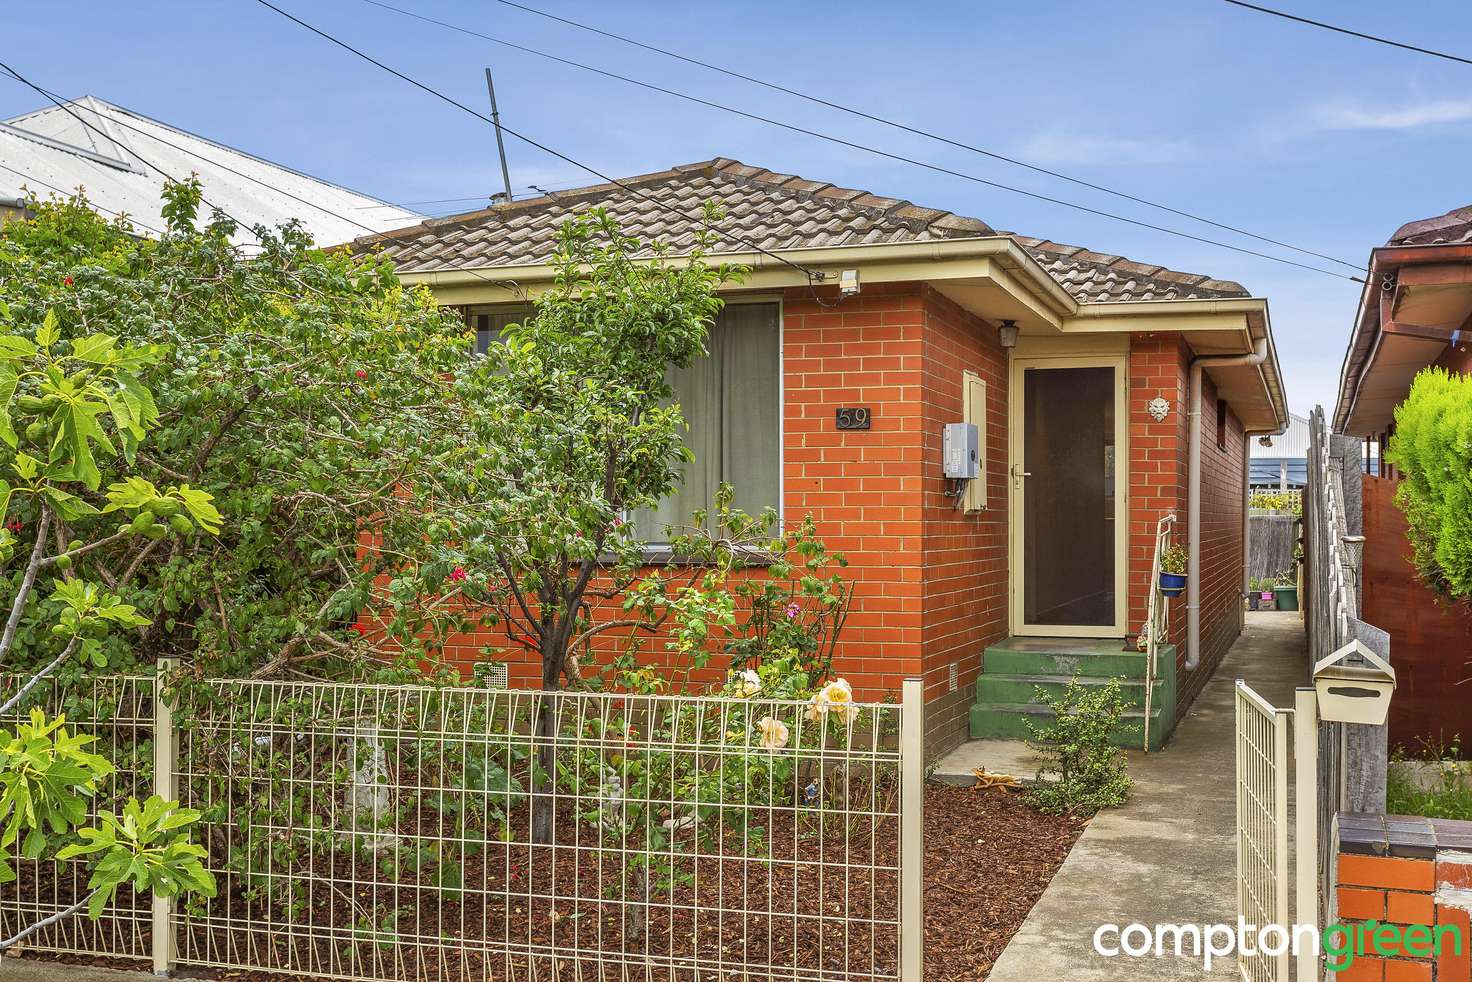 Main view of Homely house listing, 59 Coronation Street, Kingsville VIC 3012